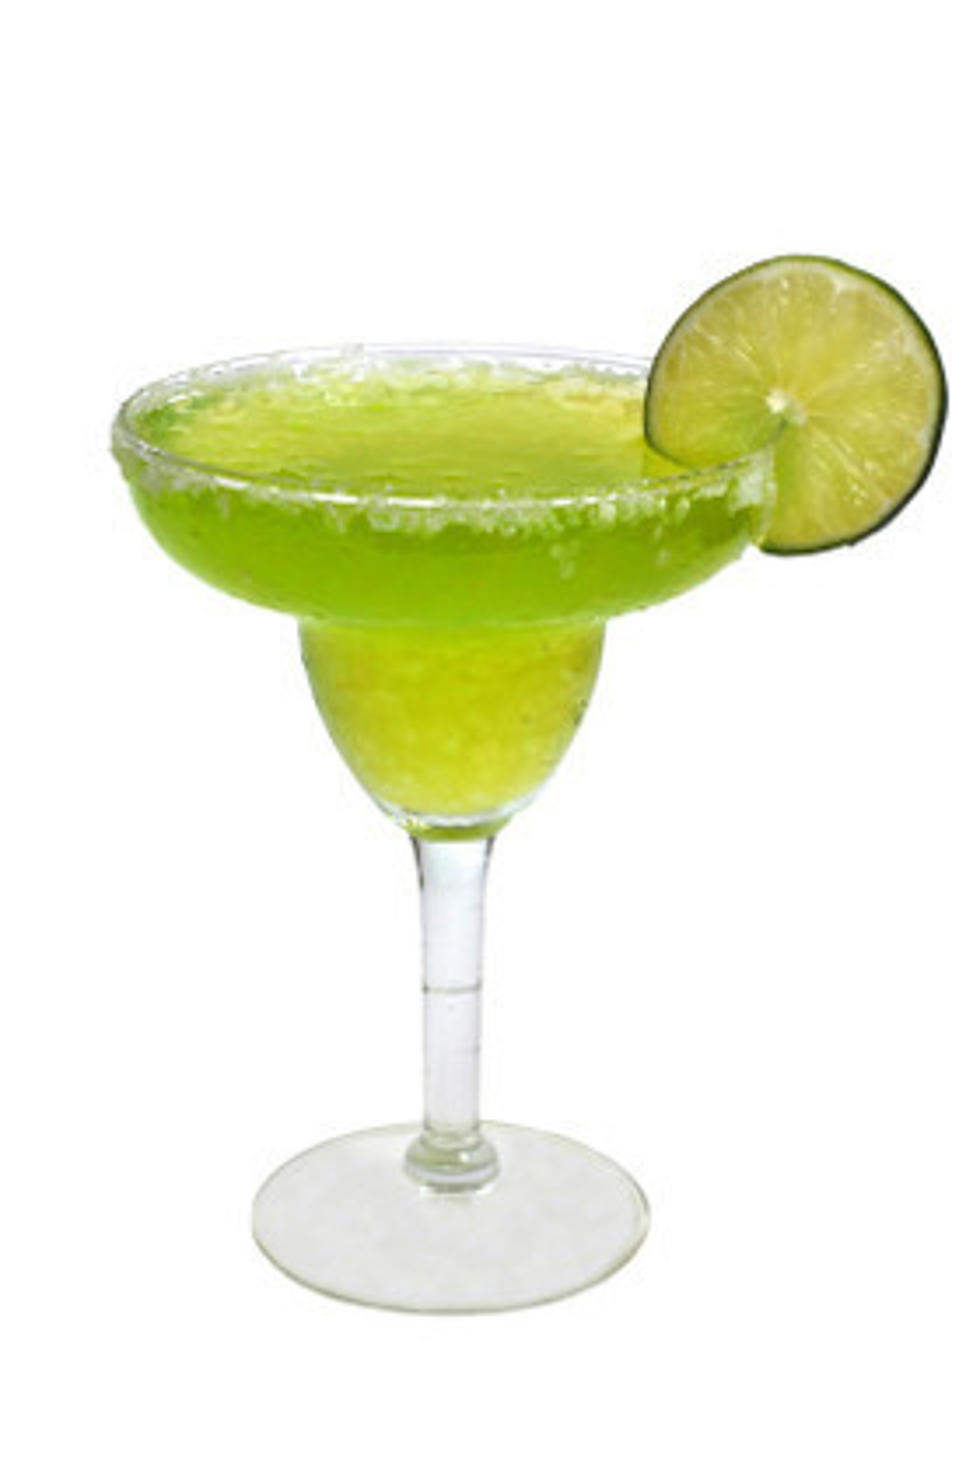 Tonight!  Margarita and Tequila Tasting to Benefit Red Cross